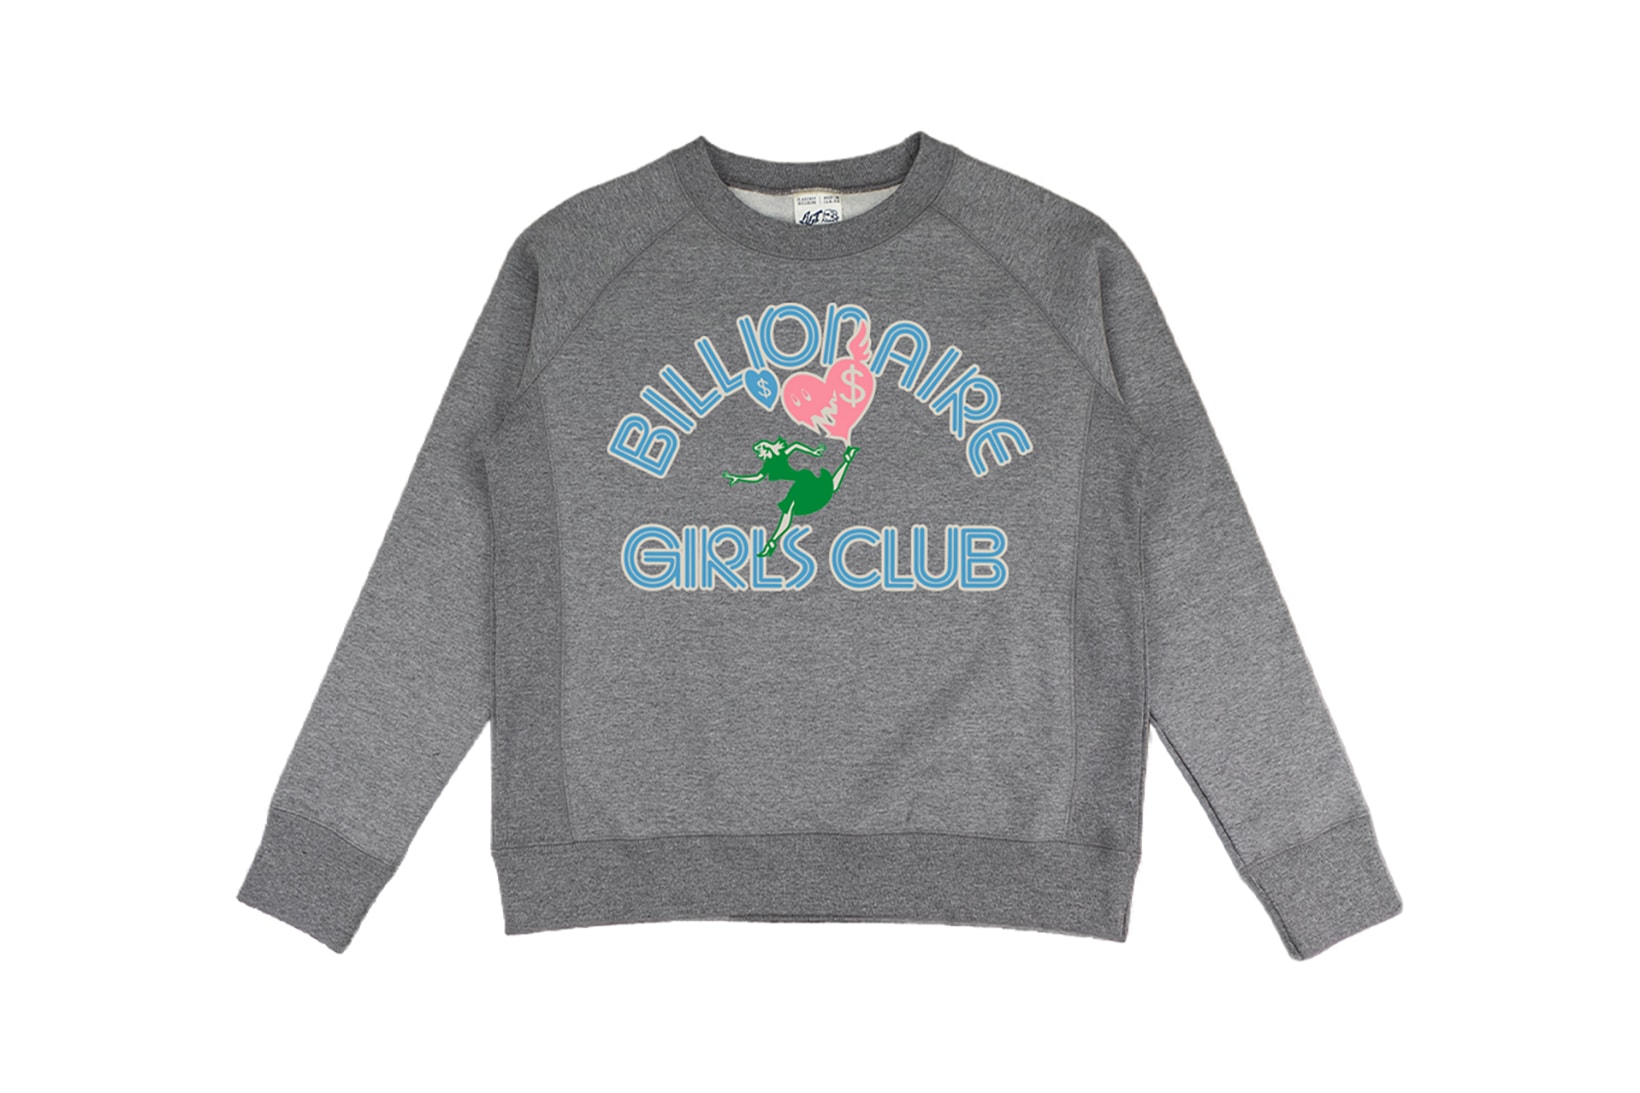 Billionaire Girls Club Relaunch Capsule Collection Sweater Grey